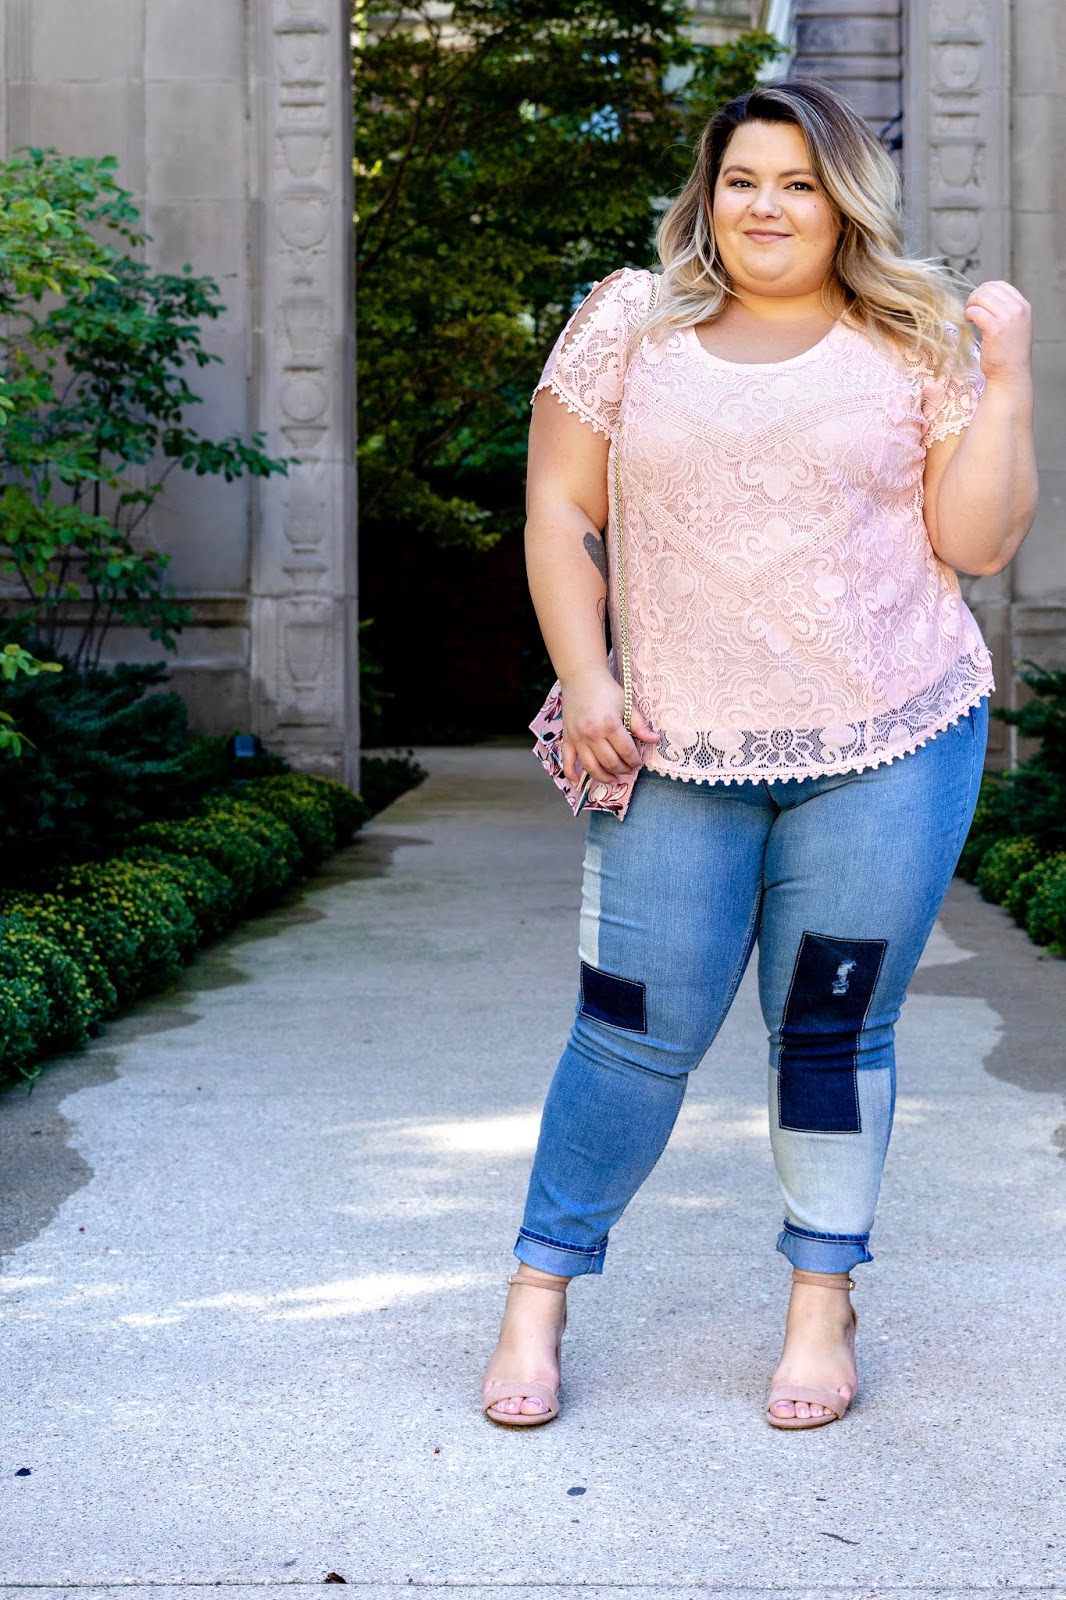 Chicago fashion blogger, Chicago plus size fashion blogger, natalie Craig, natalie in the city, plus size fashion, Chicago fashion, plus size fashion blogger, eff your beauty standards, fatshion, skorch magazine, Chicago model, plus size model, plus size petite, affordable plus size clothing, embrace your curves, plus model magazine,  petite plus size, body positive, breast cancer awareness, stage stores, plus size stage, patch jeans, patchwork denim, breast cancer research fund